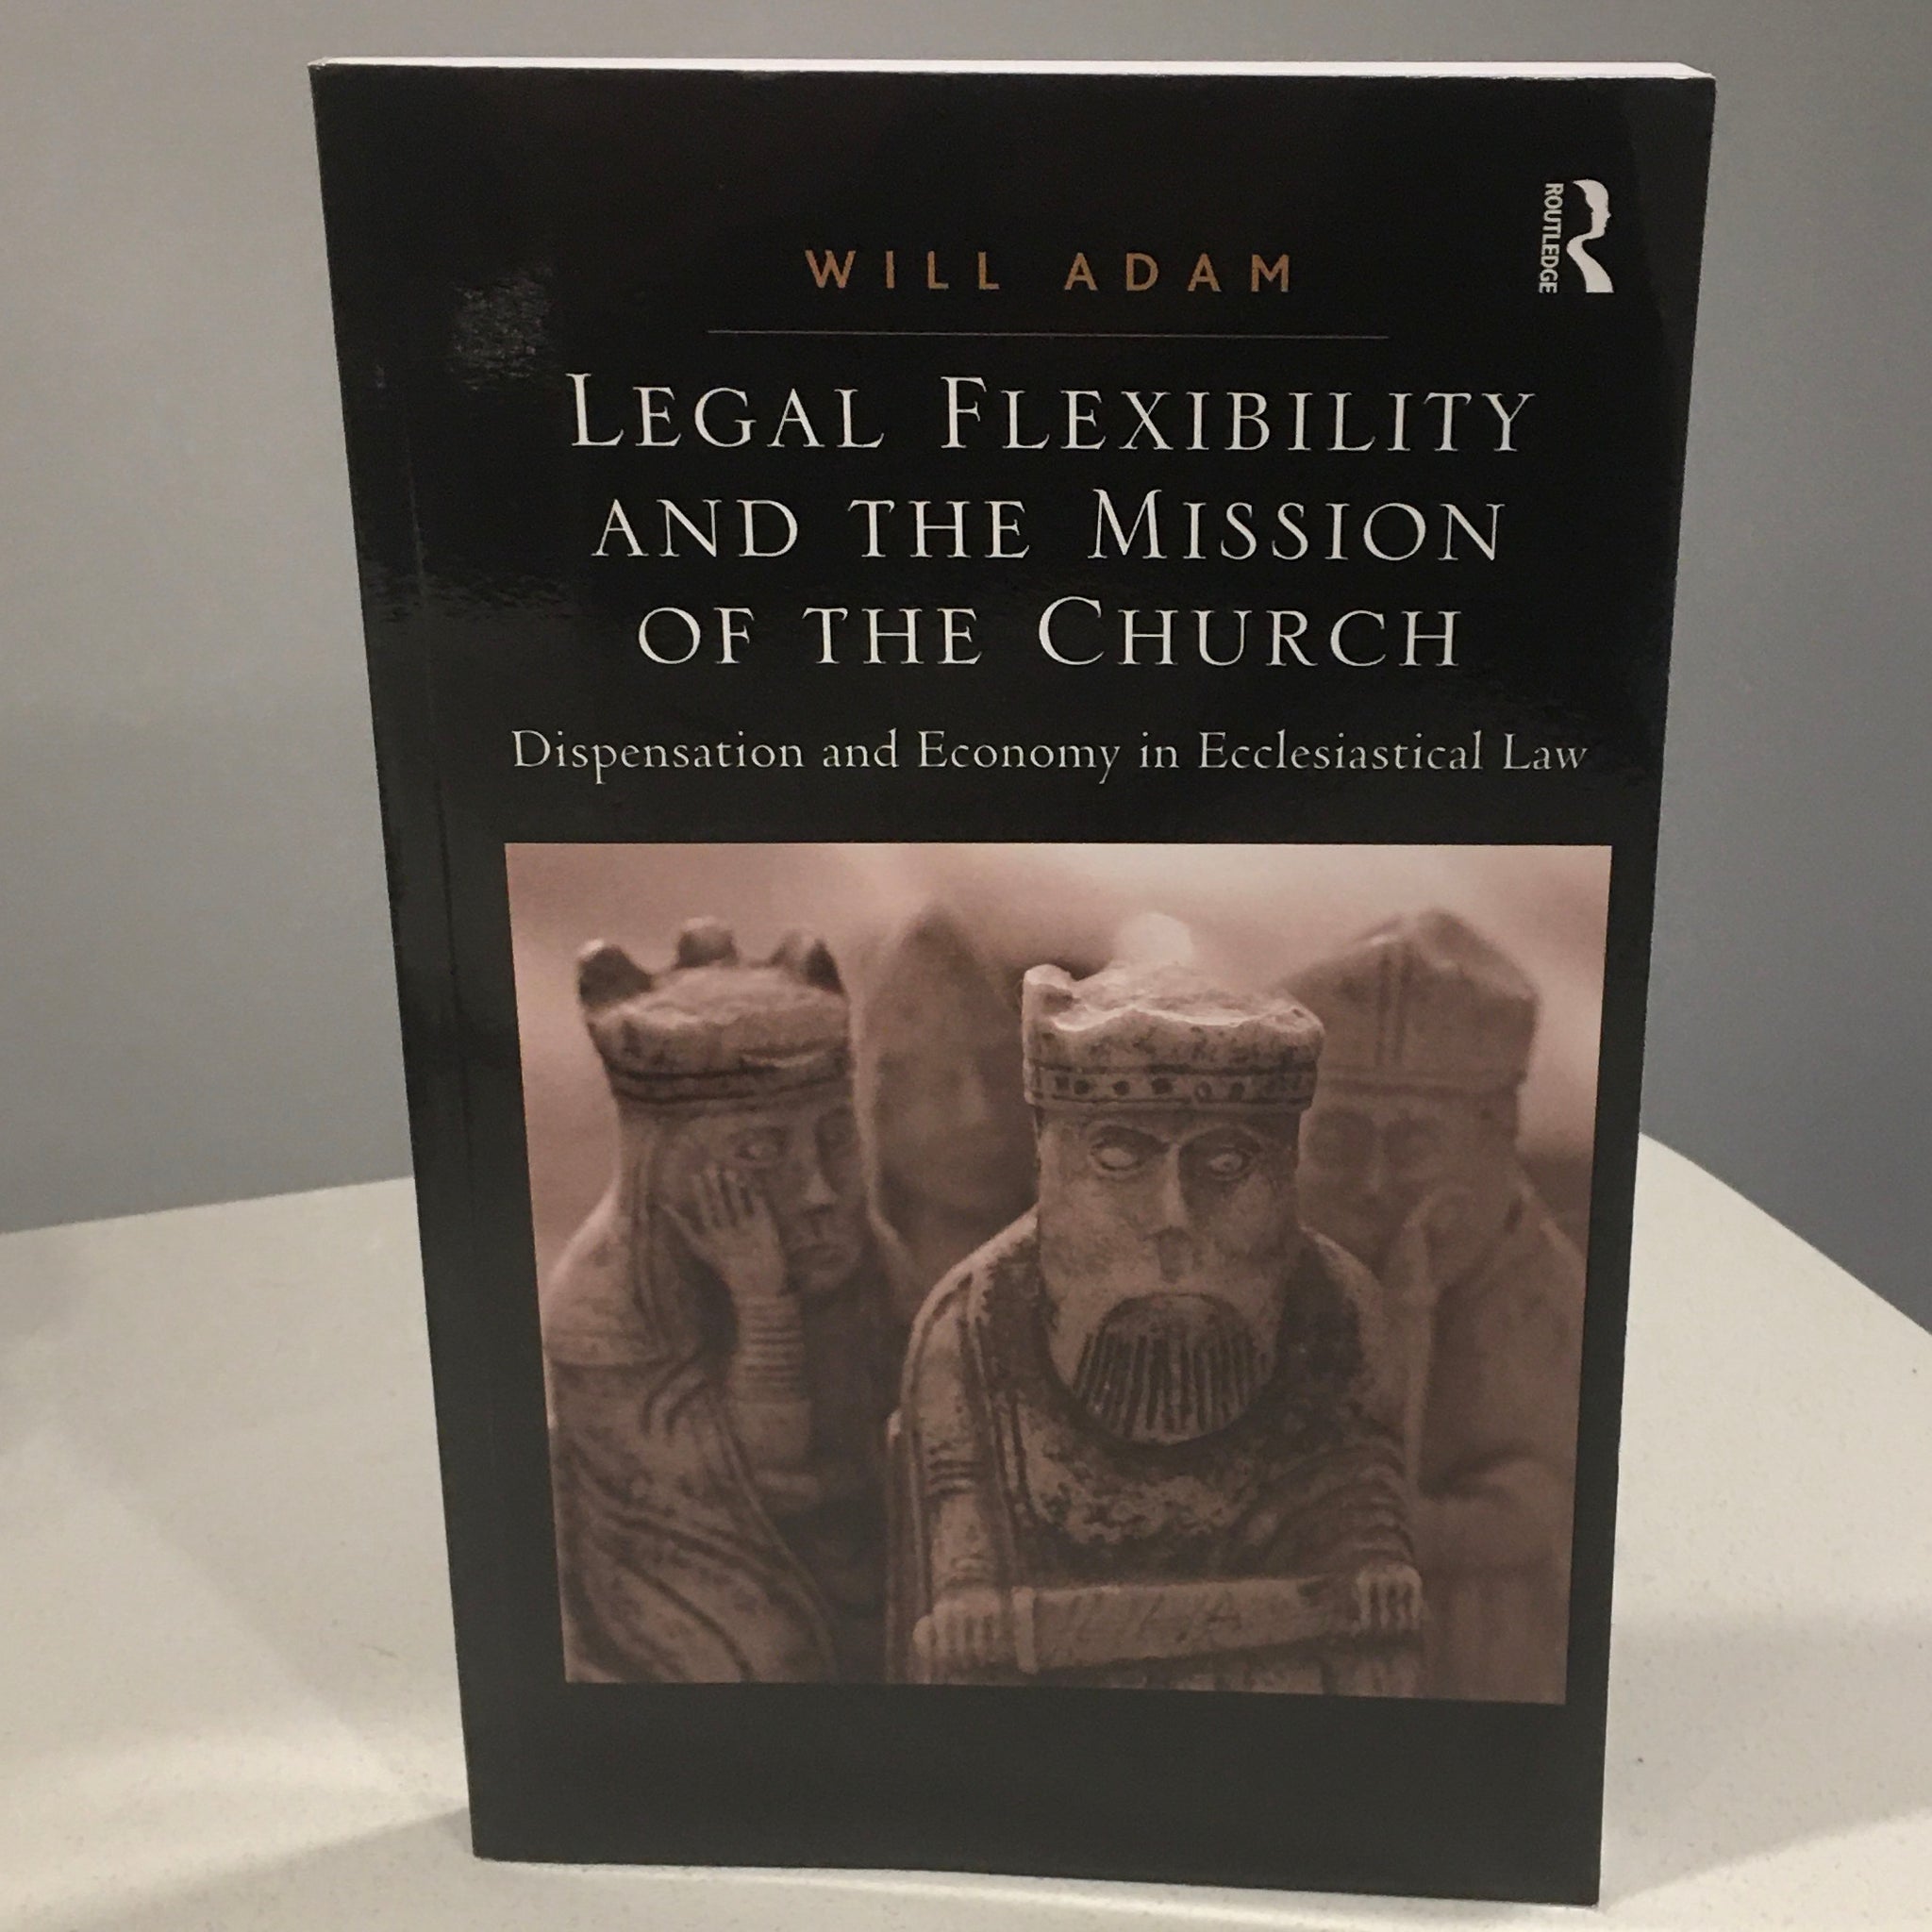 Legal Flexibility and the Mission of the Church